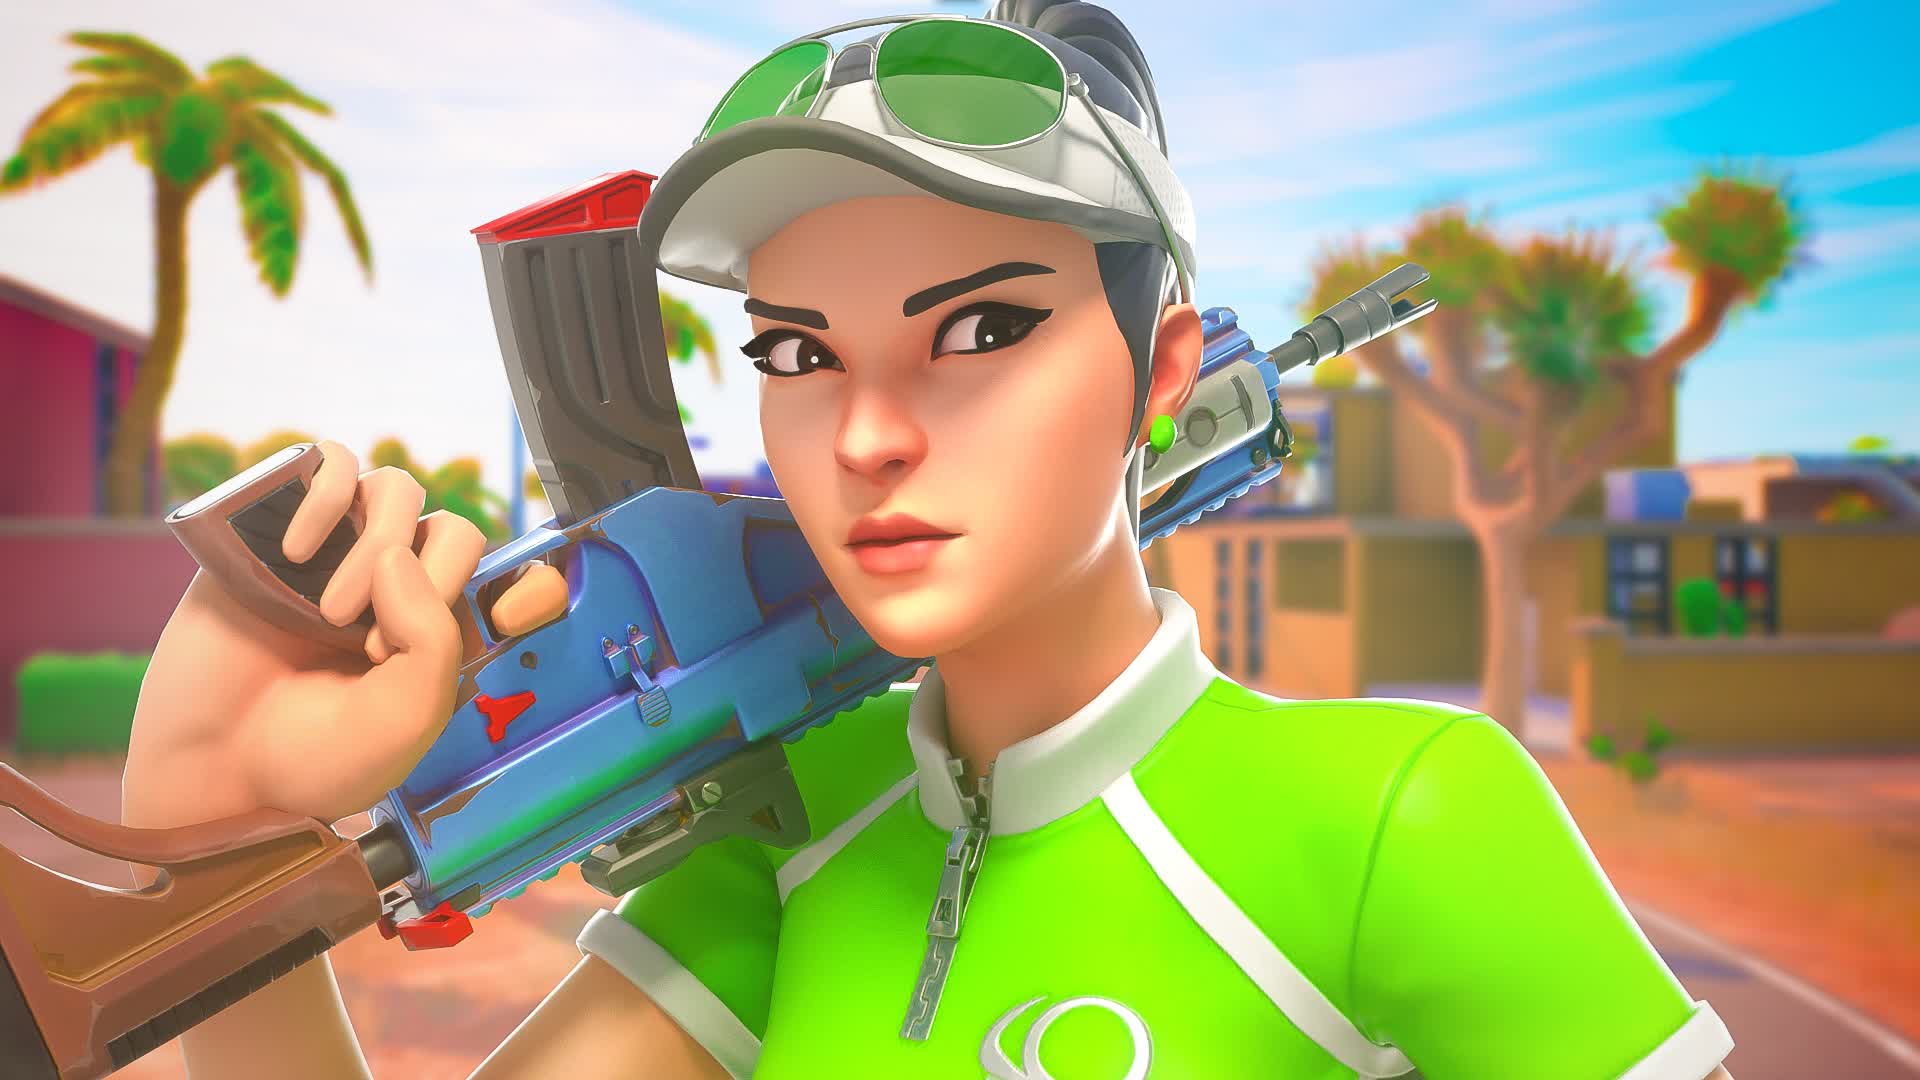 Volley Girl Fortnite Wallpapers